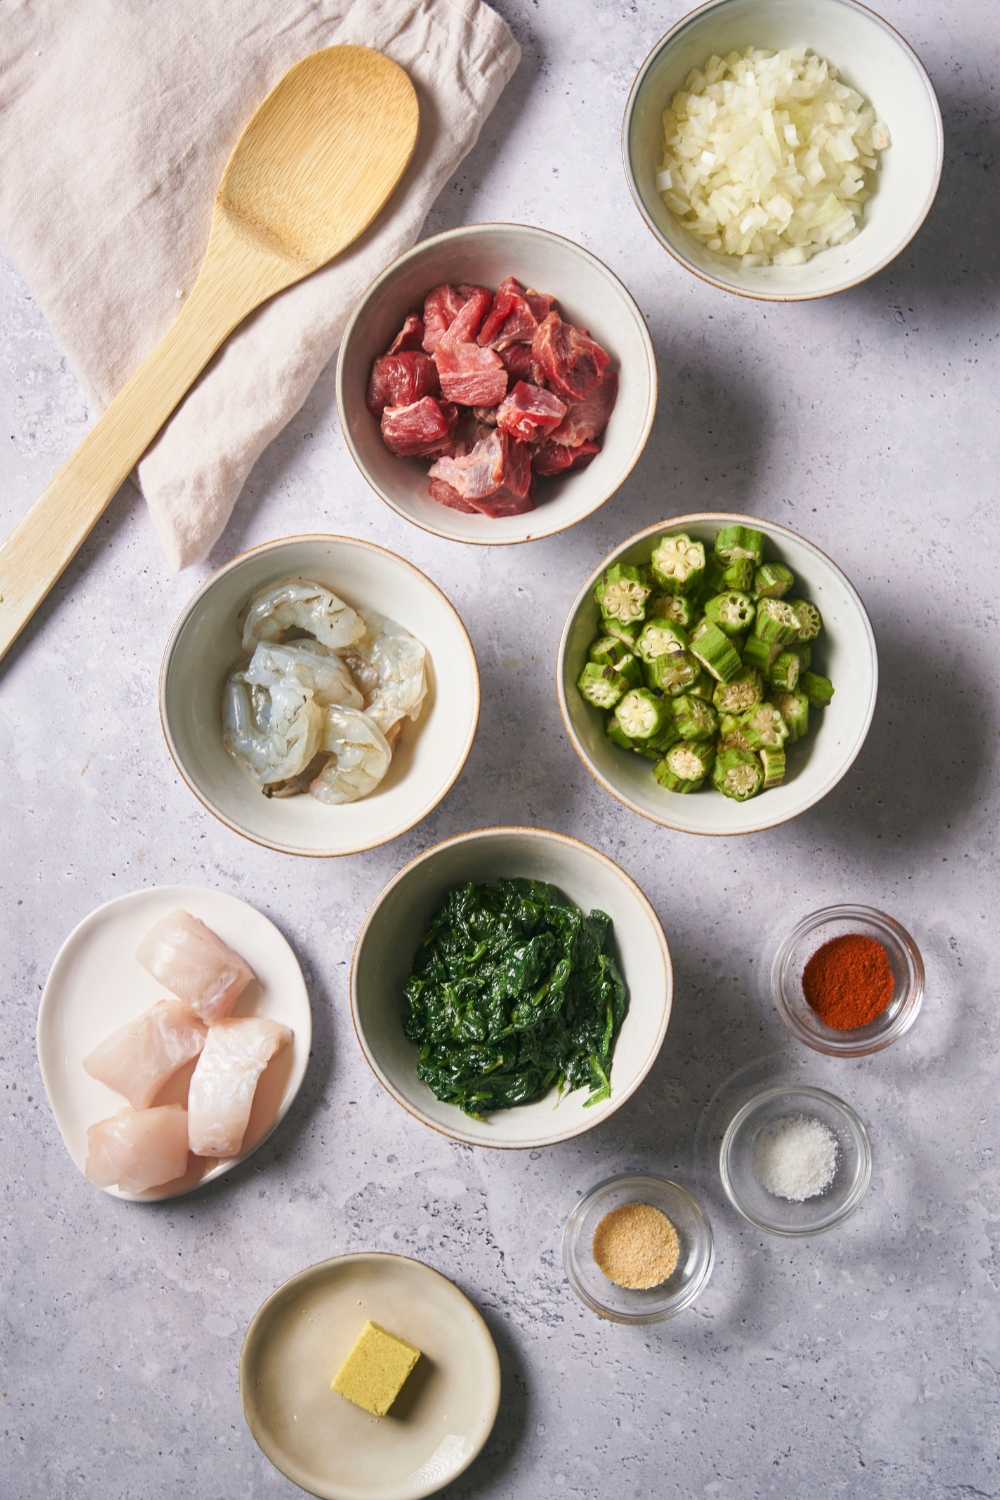 A bowl of onions, a bowl of cubed steak, a bowl of okra, a bowl of spinach, a plate with white fish on it, and a few bowls of seasonings all on a grey counter.